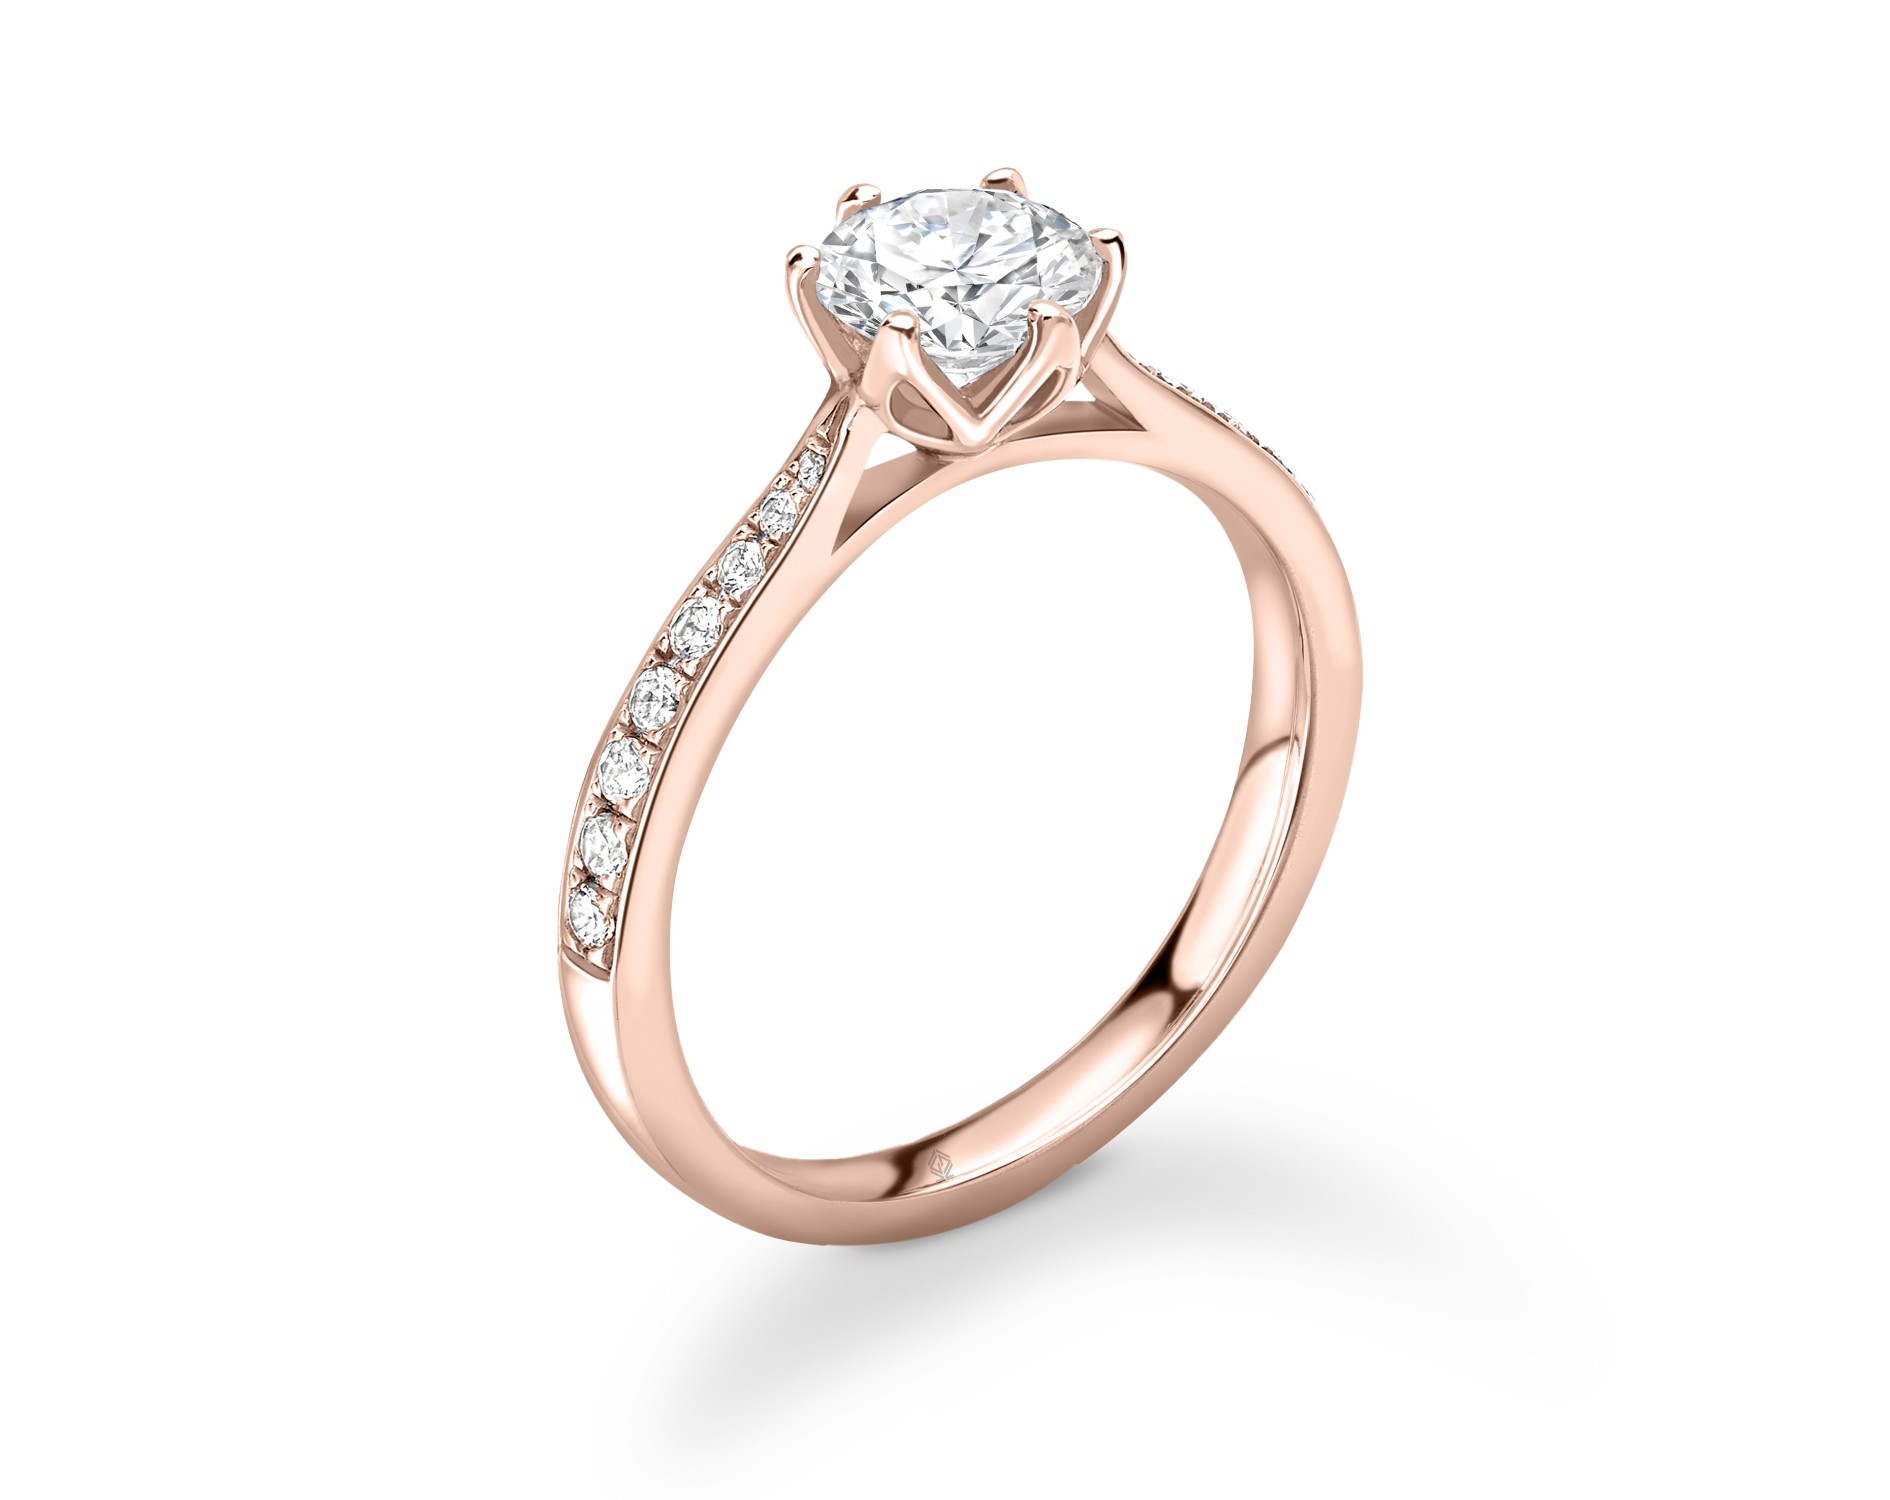 18K ROSE GOLD ROUND CUT 6 PRONGS DIAMOND ENGAGEMENT RING WITH SIDE STONES CHANNEL SET